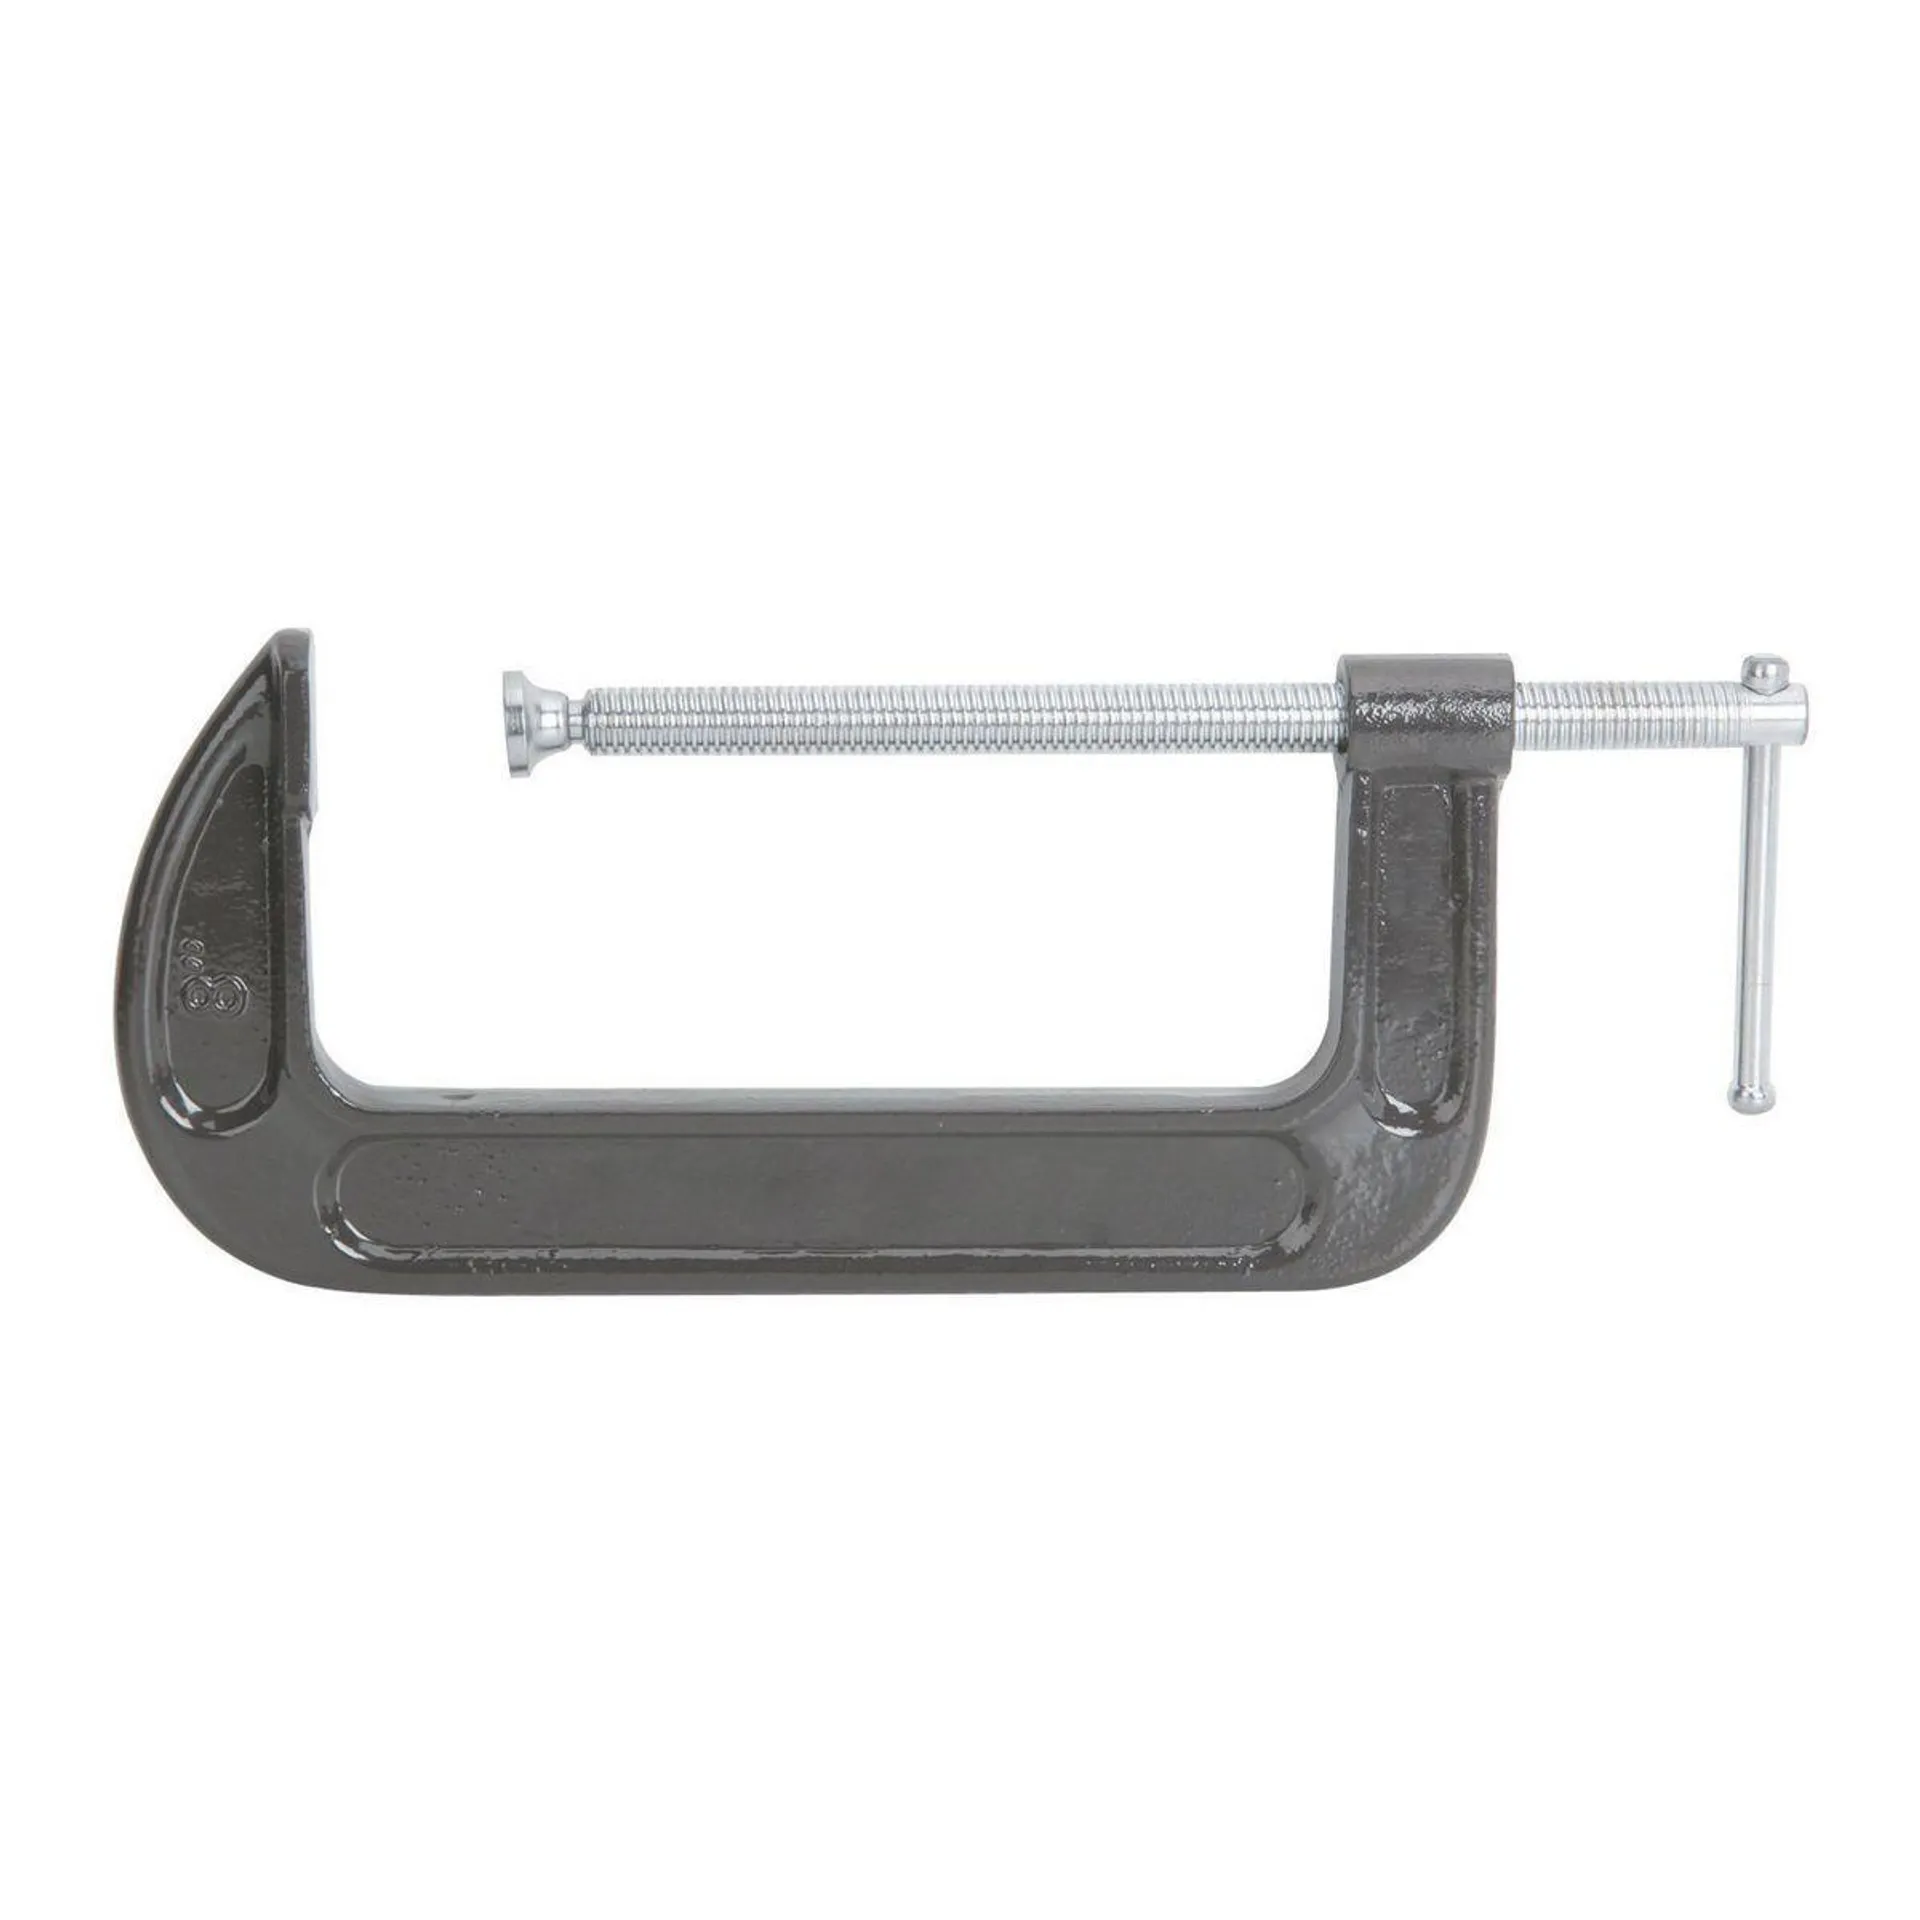 PITTSBURGH 8 in. C-Clamp